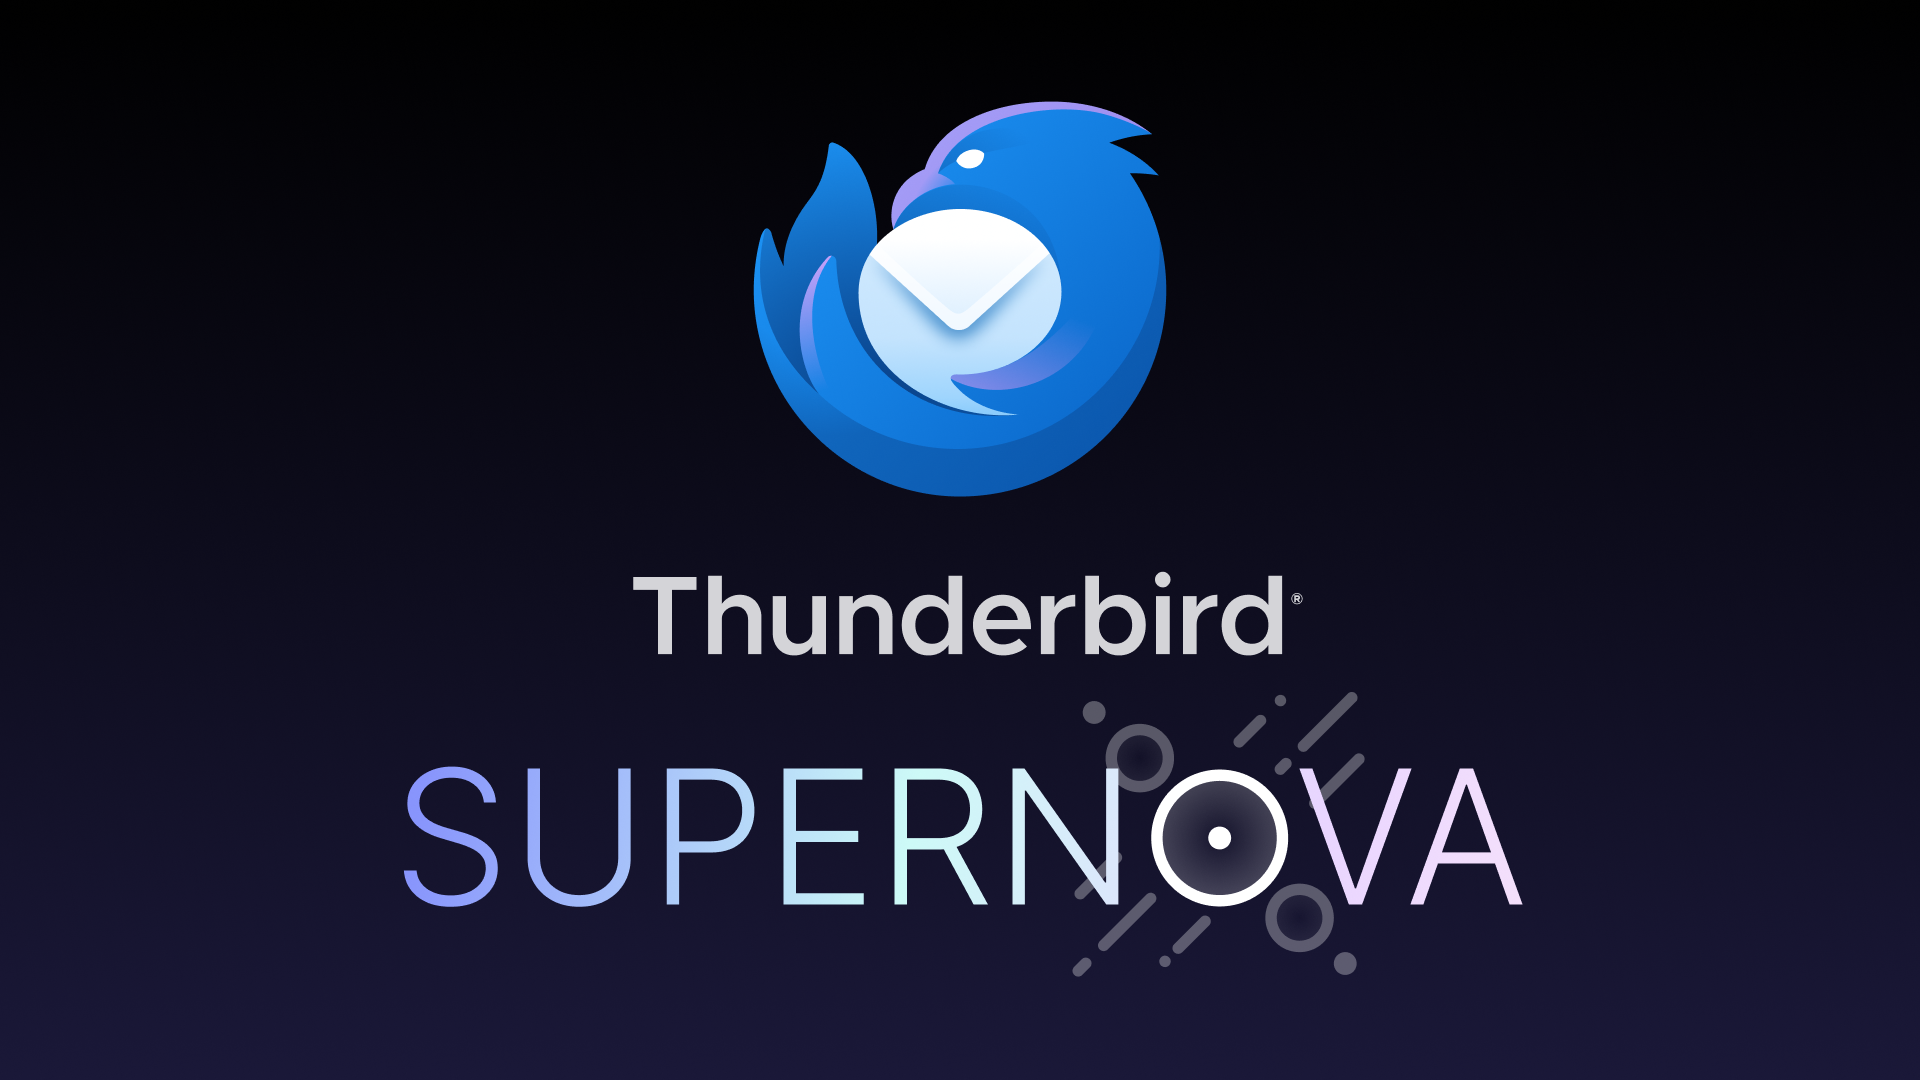 Thunderbird 115 is the last version for Windows 7 and 8